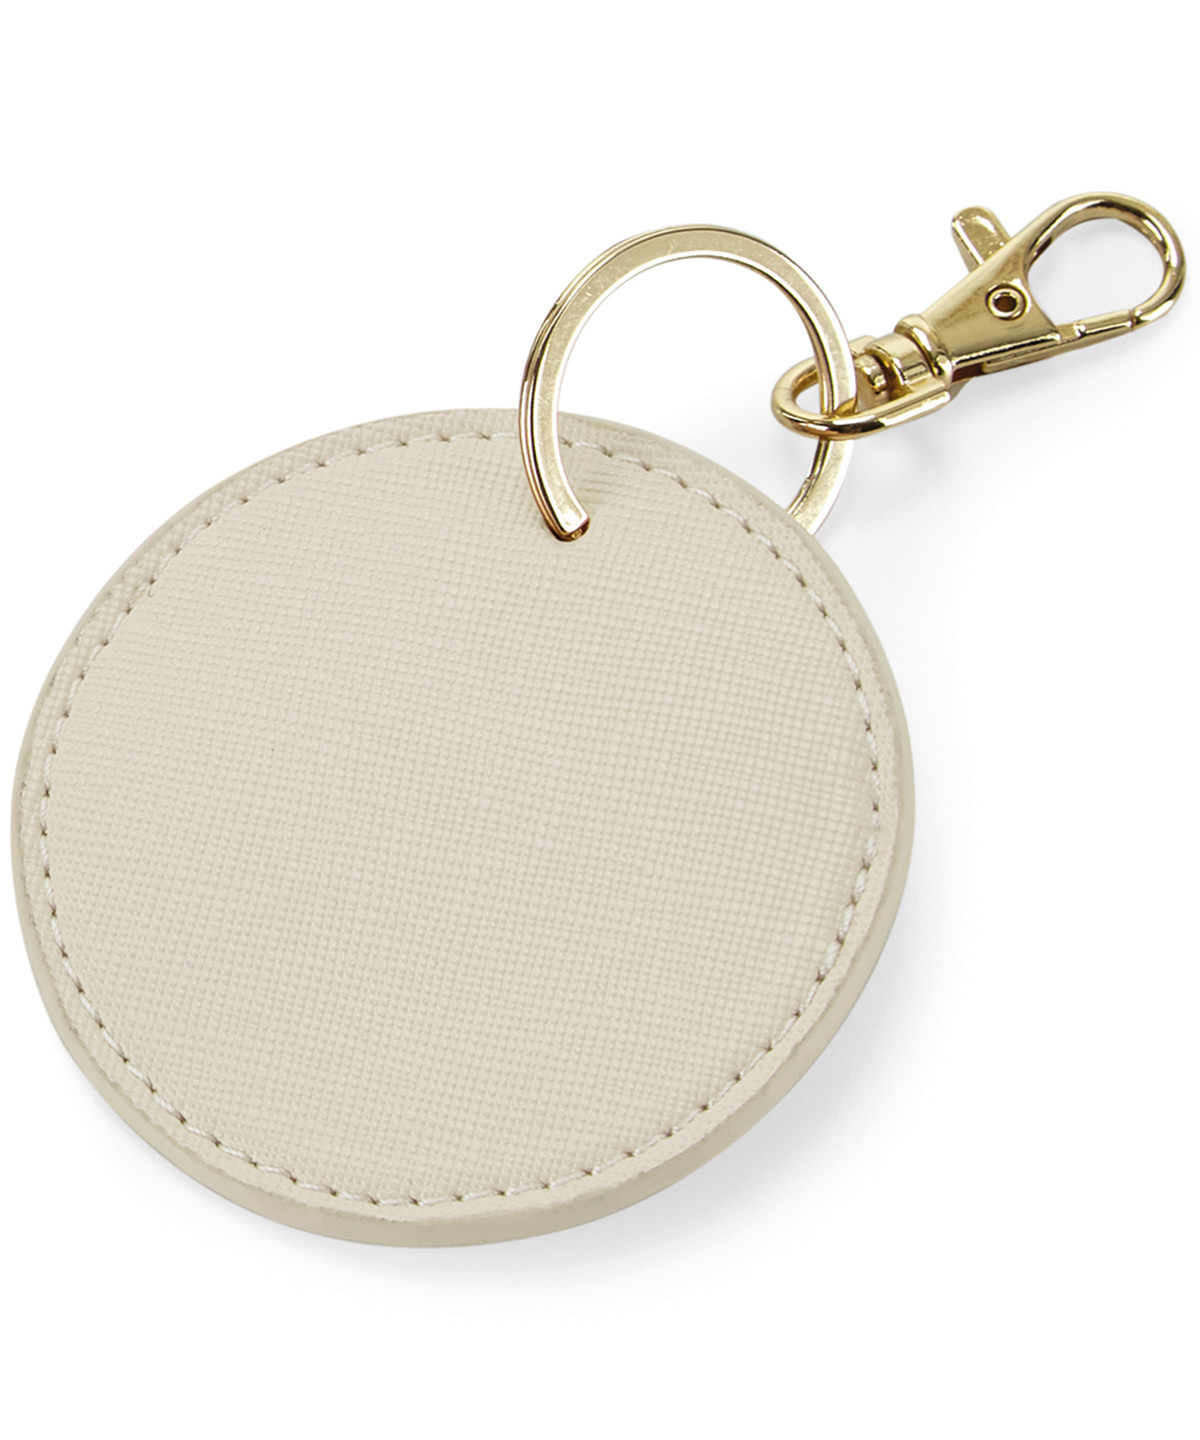 Boutique Circular Keyclip Oyster Size One Size